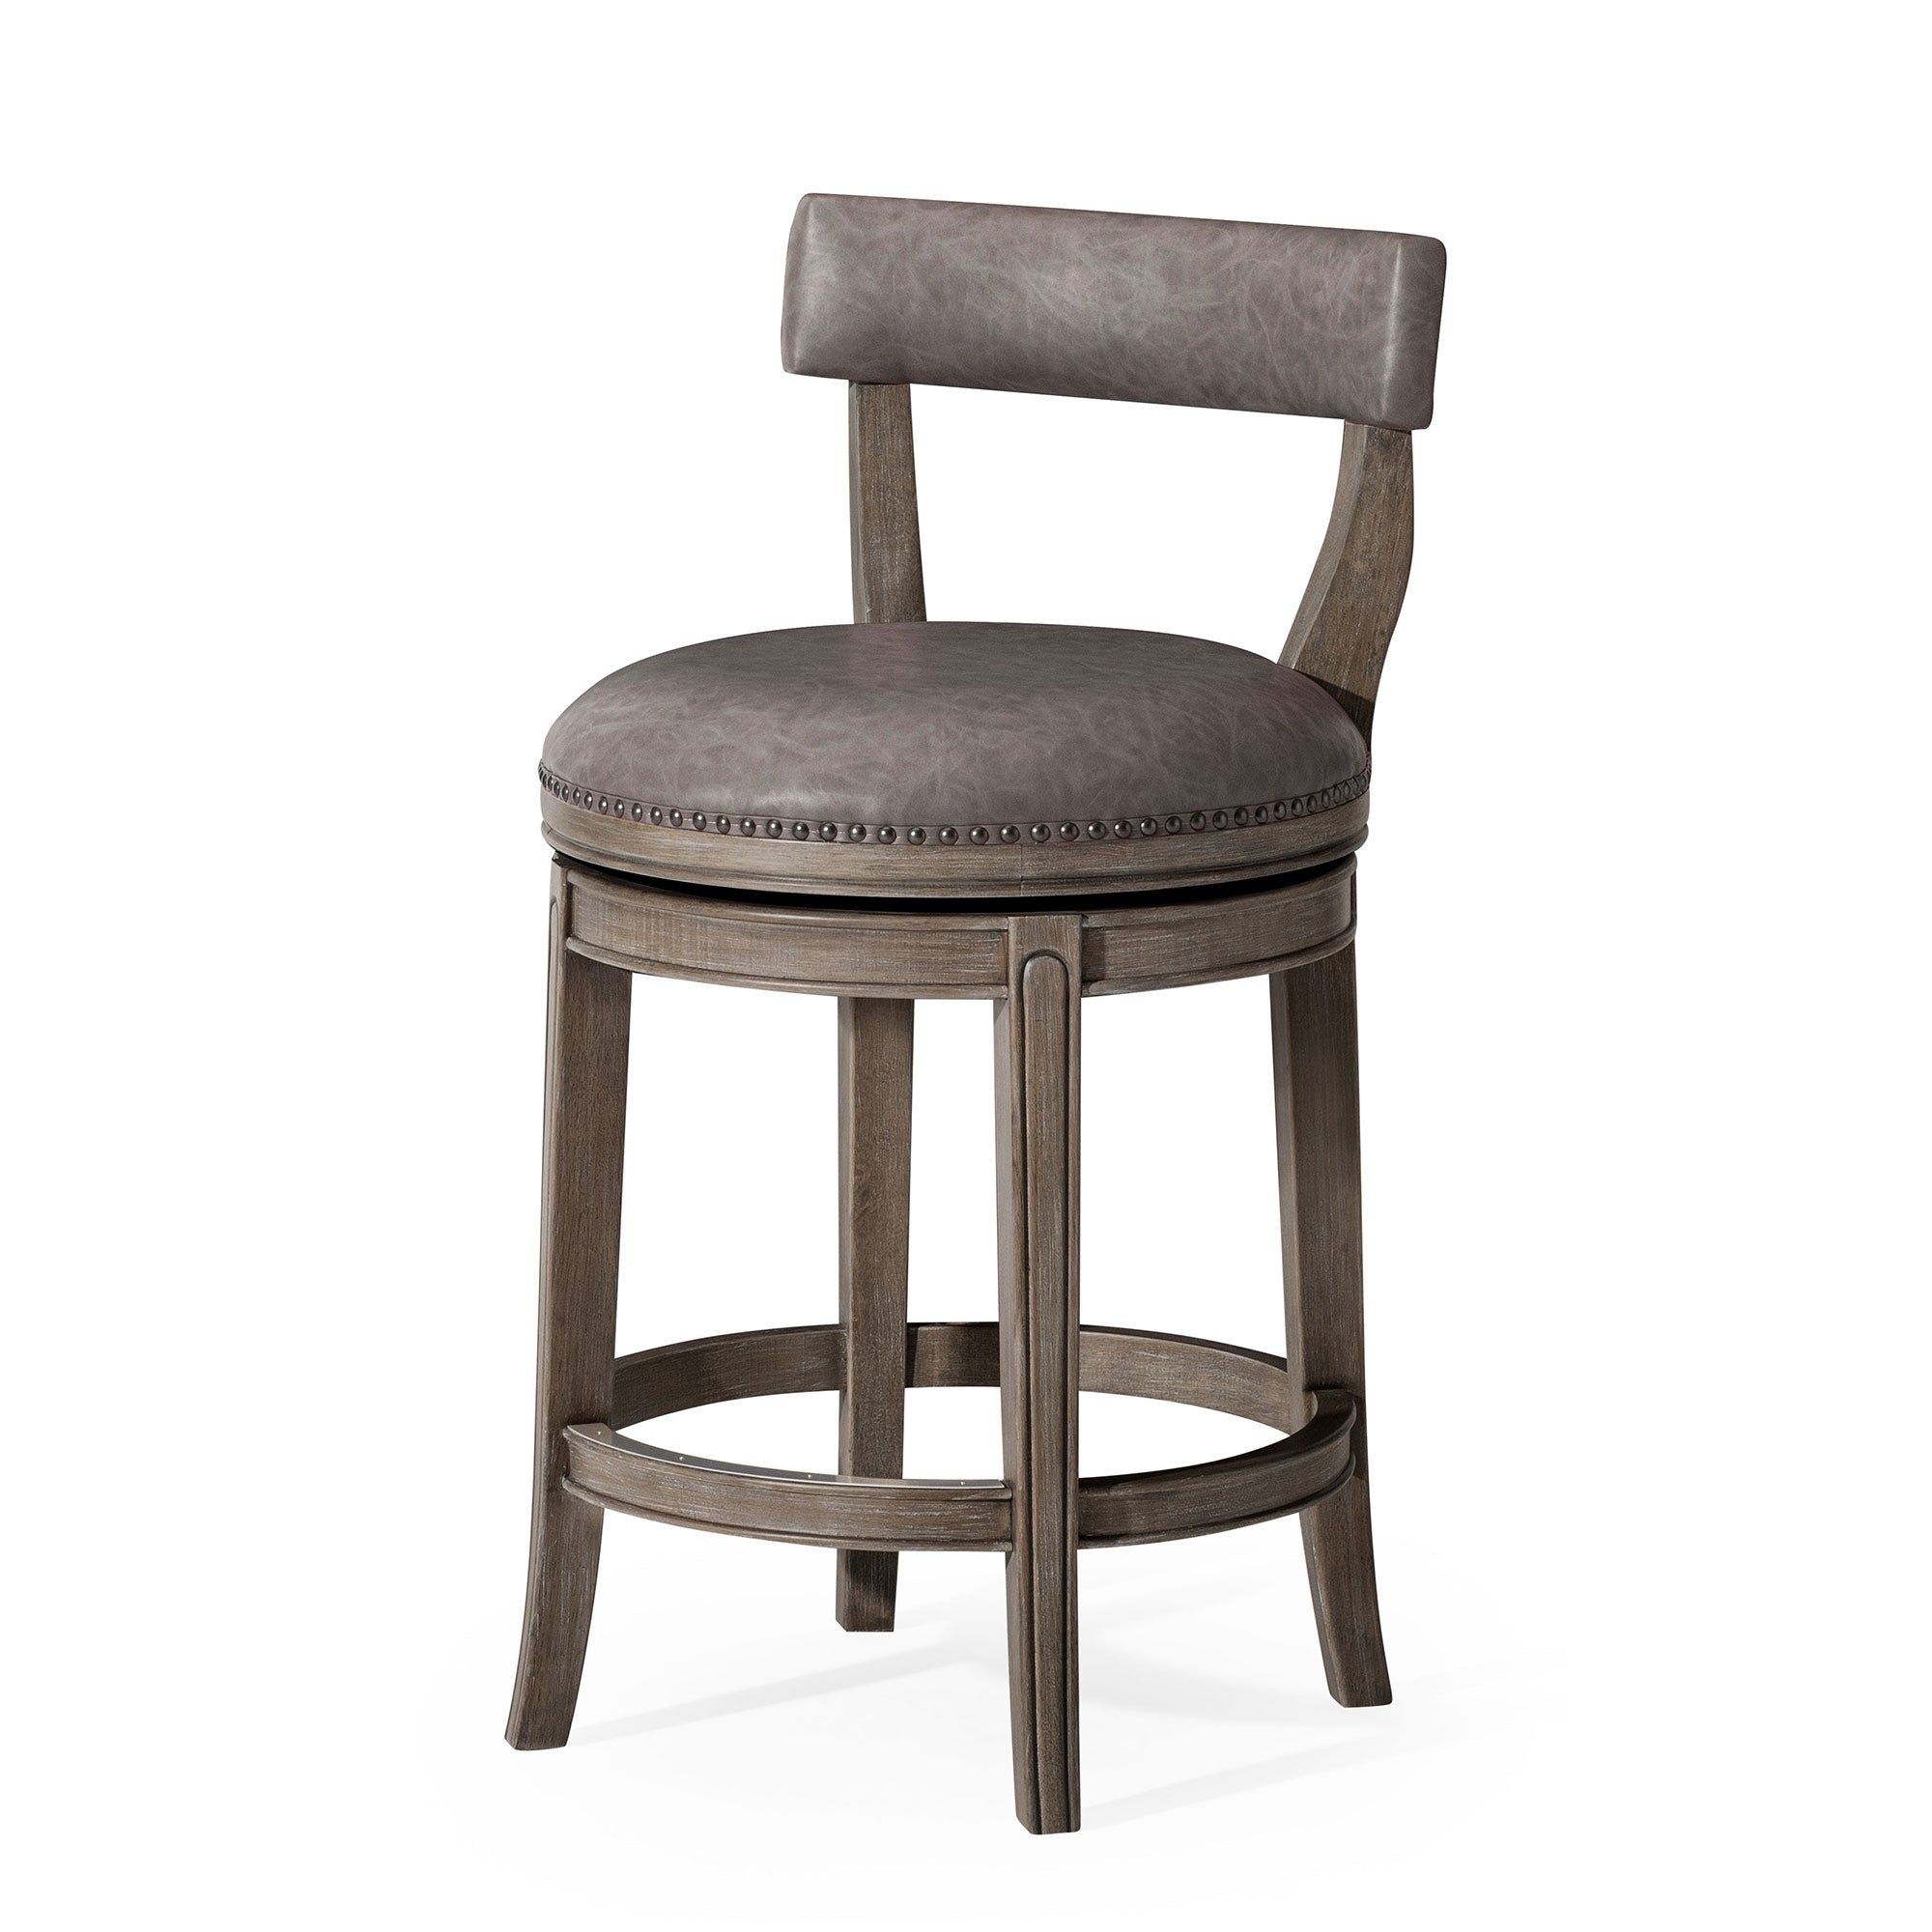 Alexander Counter Stool in Reclaimed Oak Finish with Ronan Stone Vegan Leather in Stools by Maven Lane